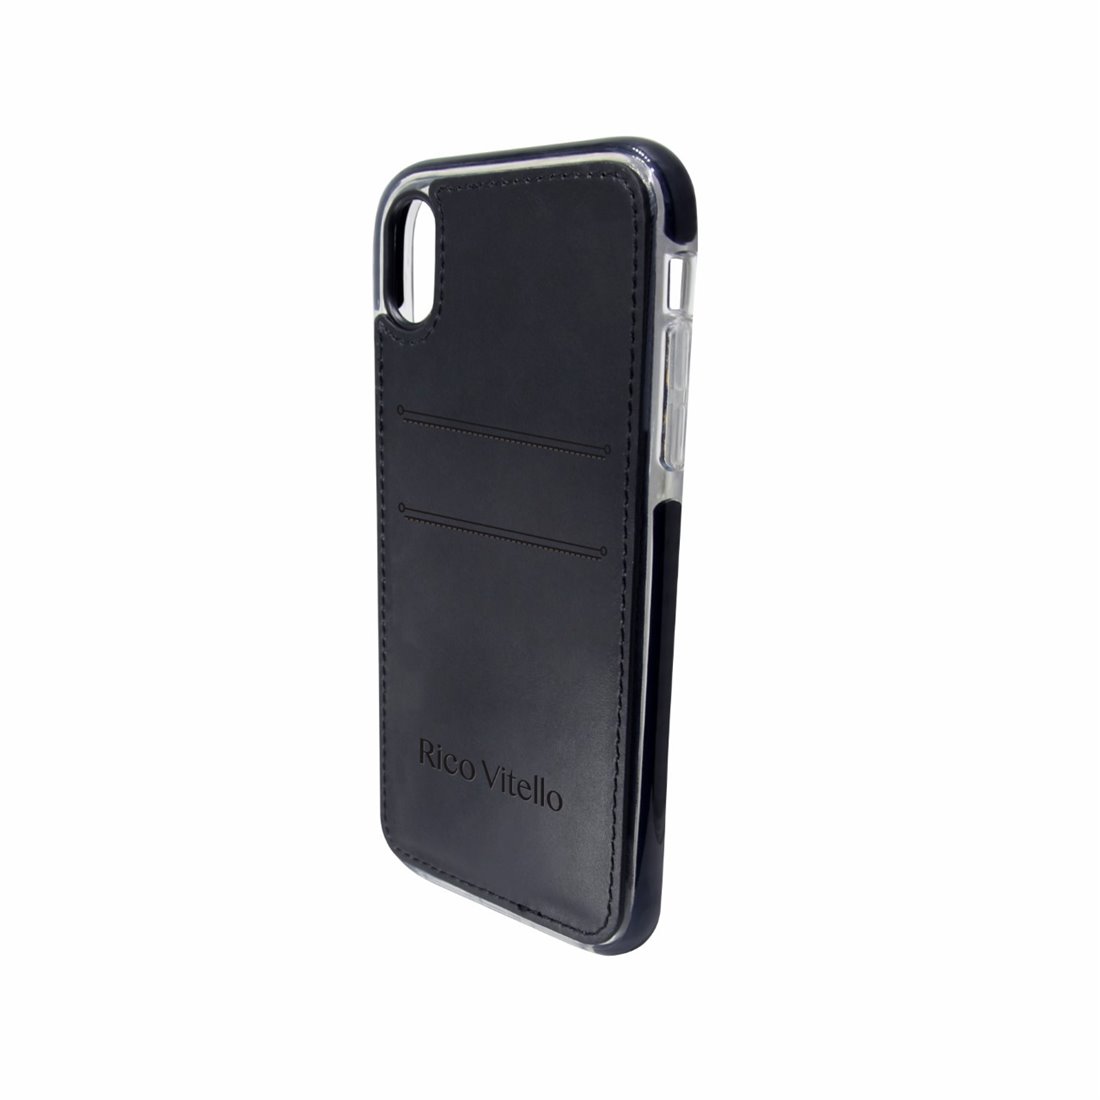 Genuine leather back cover for XS black